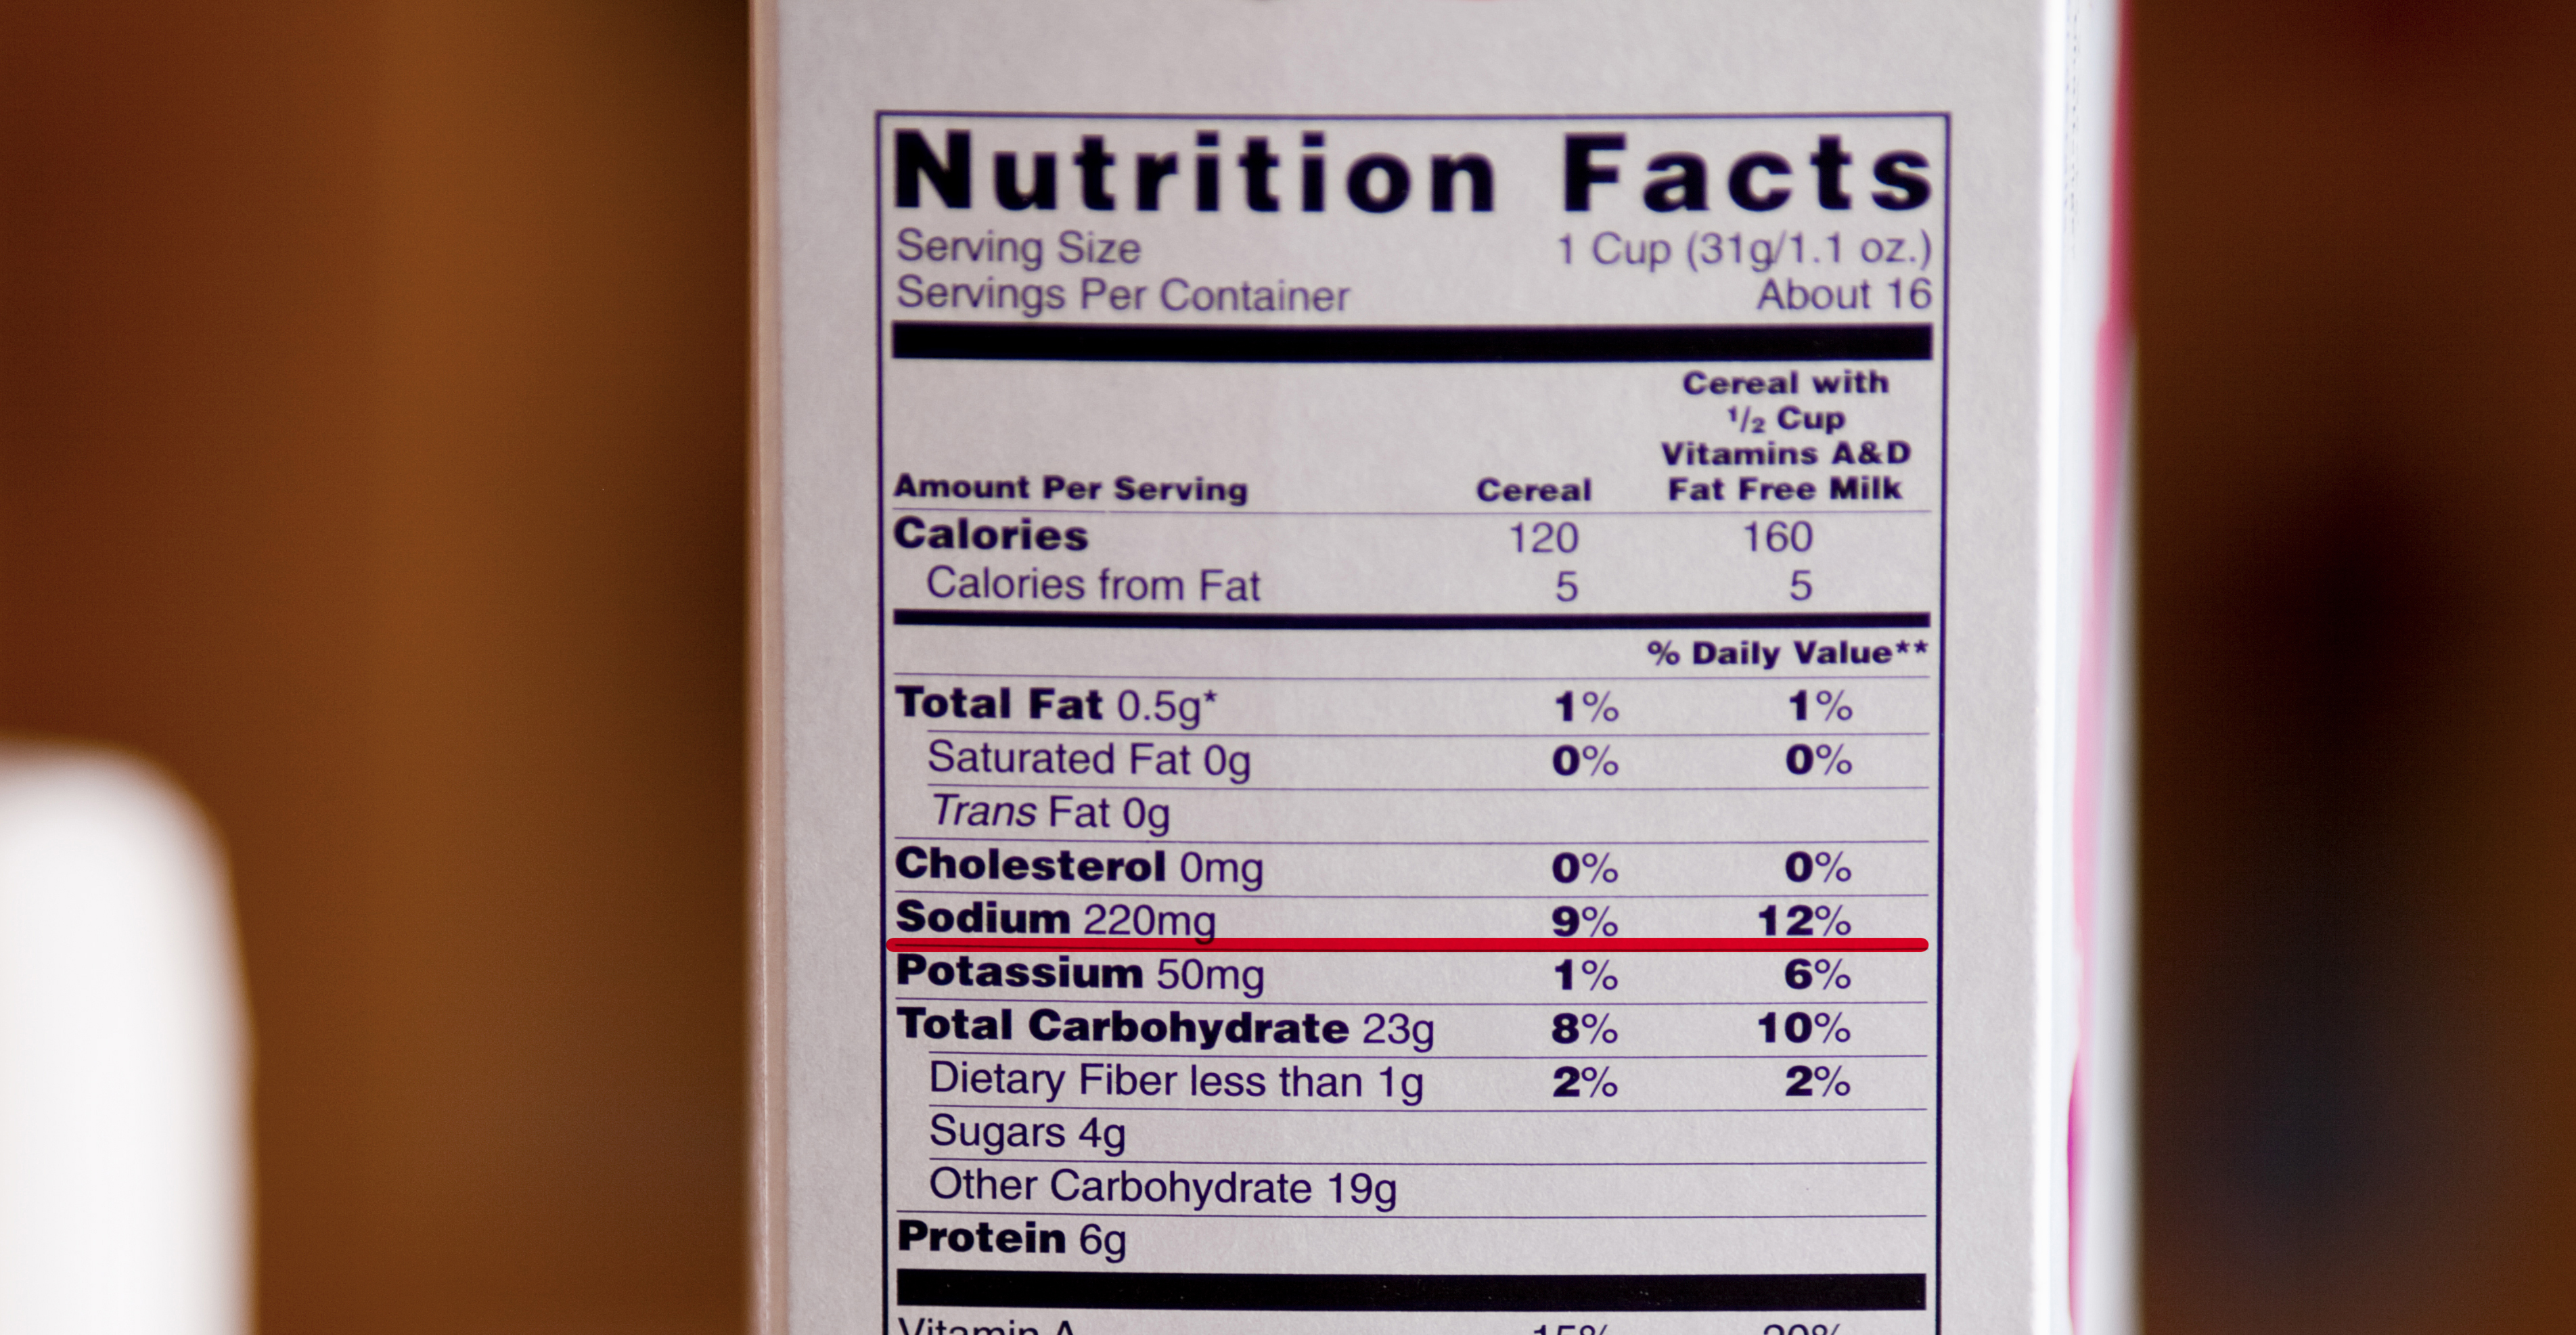 Nutritional Information Panel (NIP) showing Sodium Content in a product.